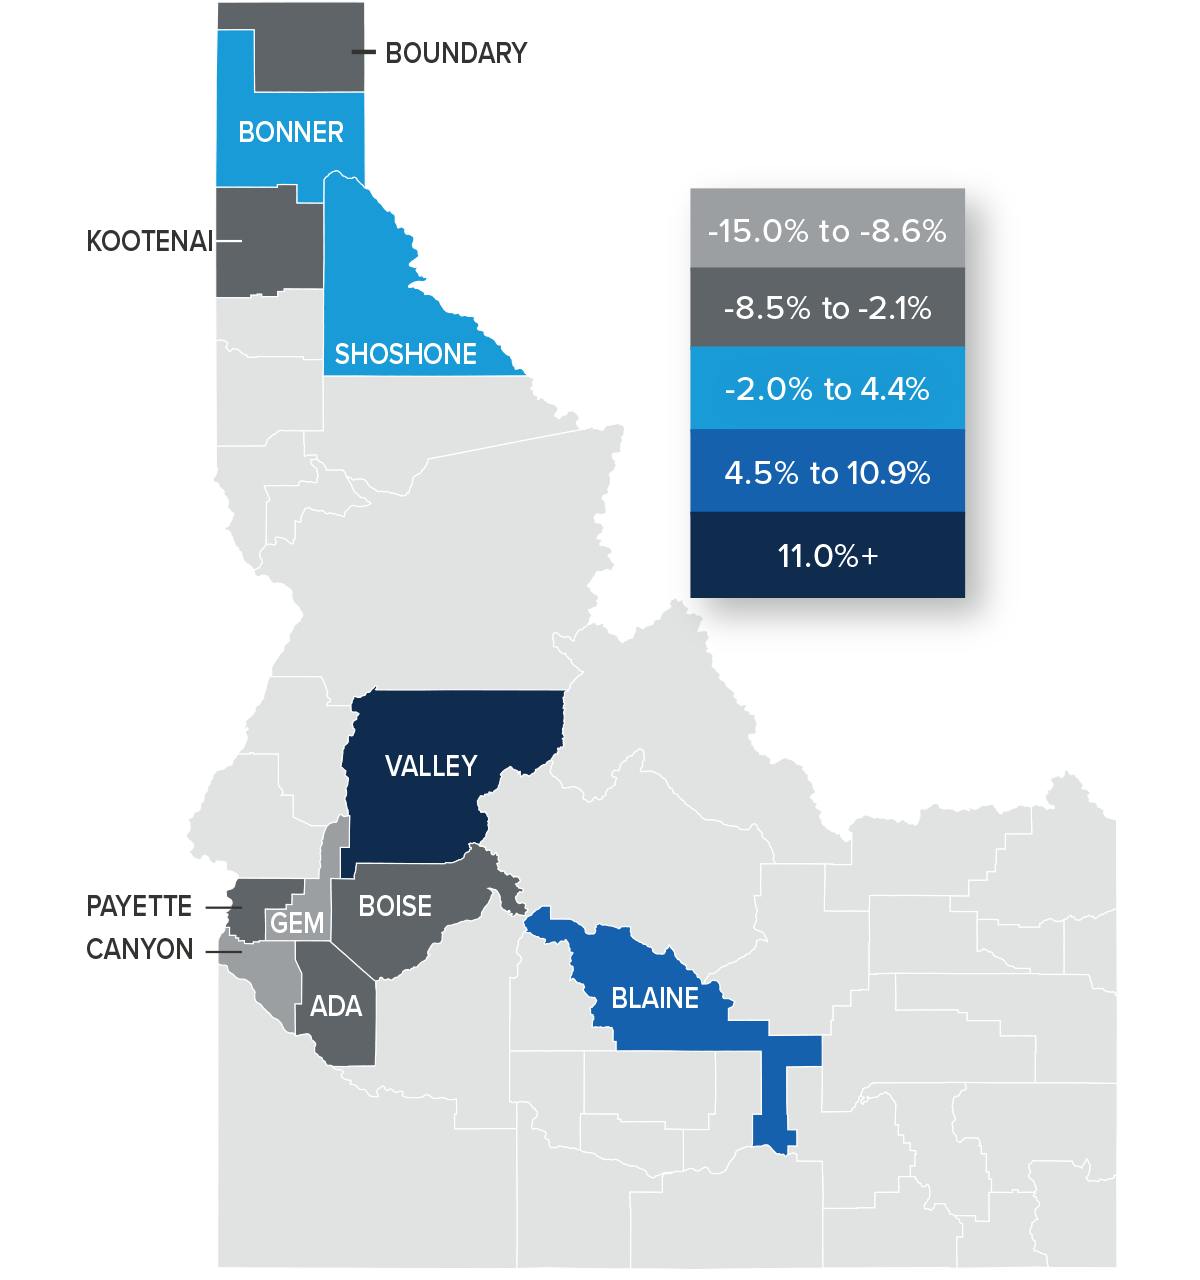 A map showing the real estate home prices percentage changes for various counties in Idaho. Different colors correspond to different tiers of percentage change. Gem and Canyon counties have a percentage change in the -15% to -8.6% range, Boundary, Kootenai, Boise, Ada, and Payette are in the -8.5% to -2.1% change range, Shoshone and Bonner are in the -2% to -4.4% change range, Blaine is in the 4.55 to 10.9% change range, and Valley is in the 11%+ change range.